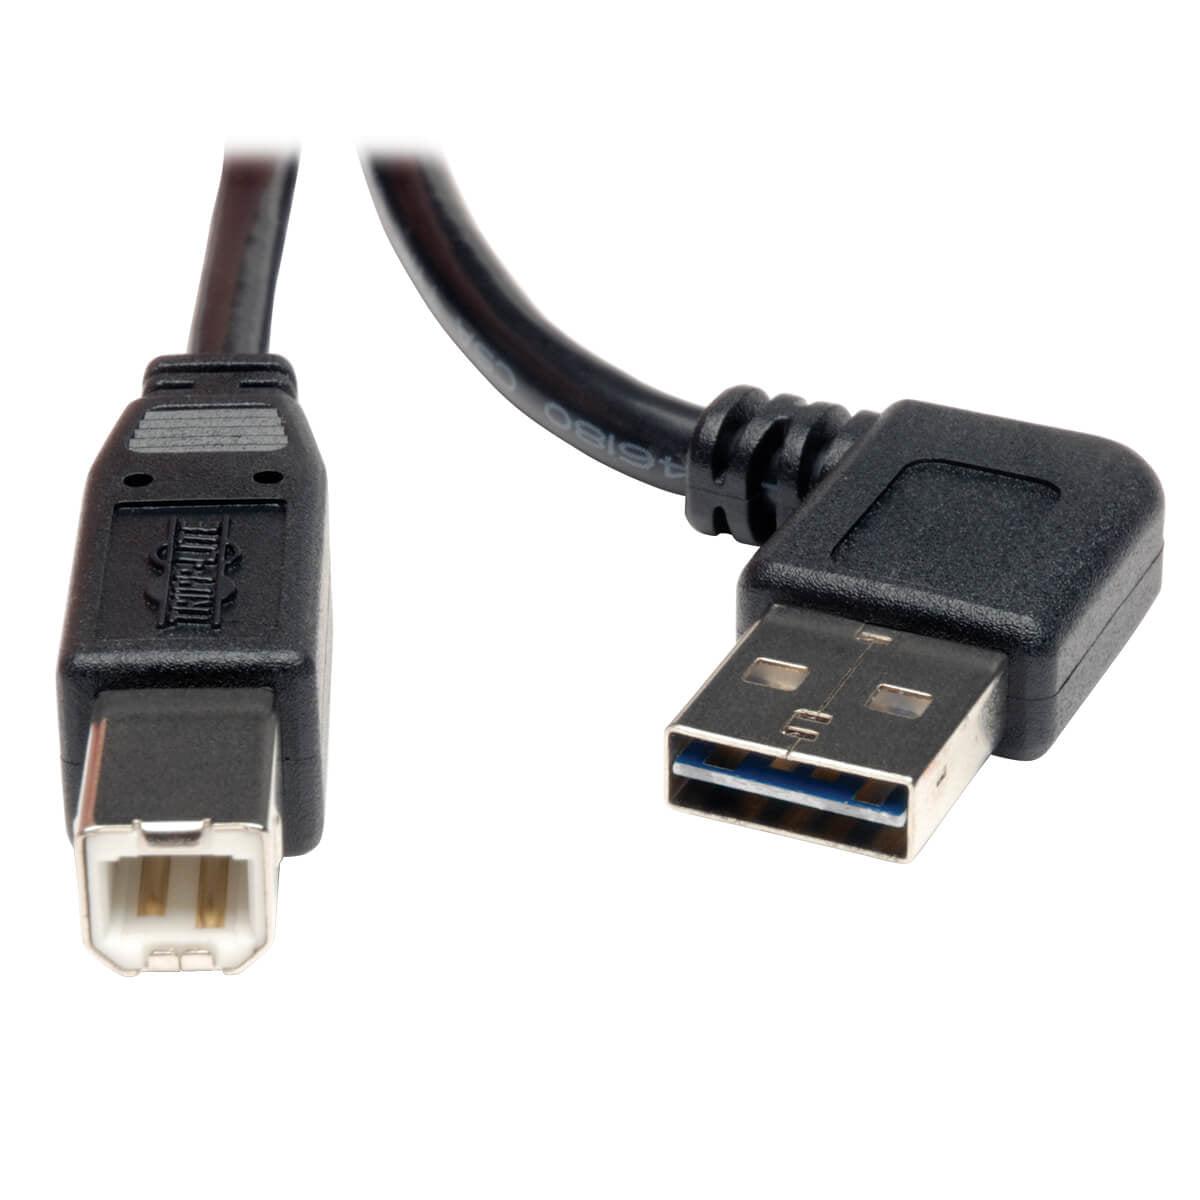 Tripp Lite Ur022-003-Ra Universal Reversible Usb 2.0 Cable (Right / Left-Angle Reversible A To B M/M), 3 Ft. (0.91 M)